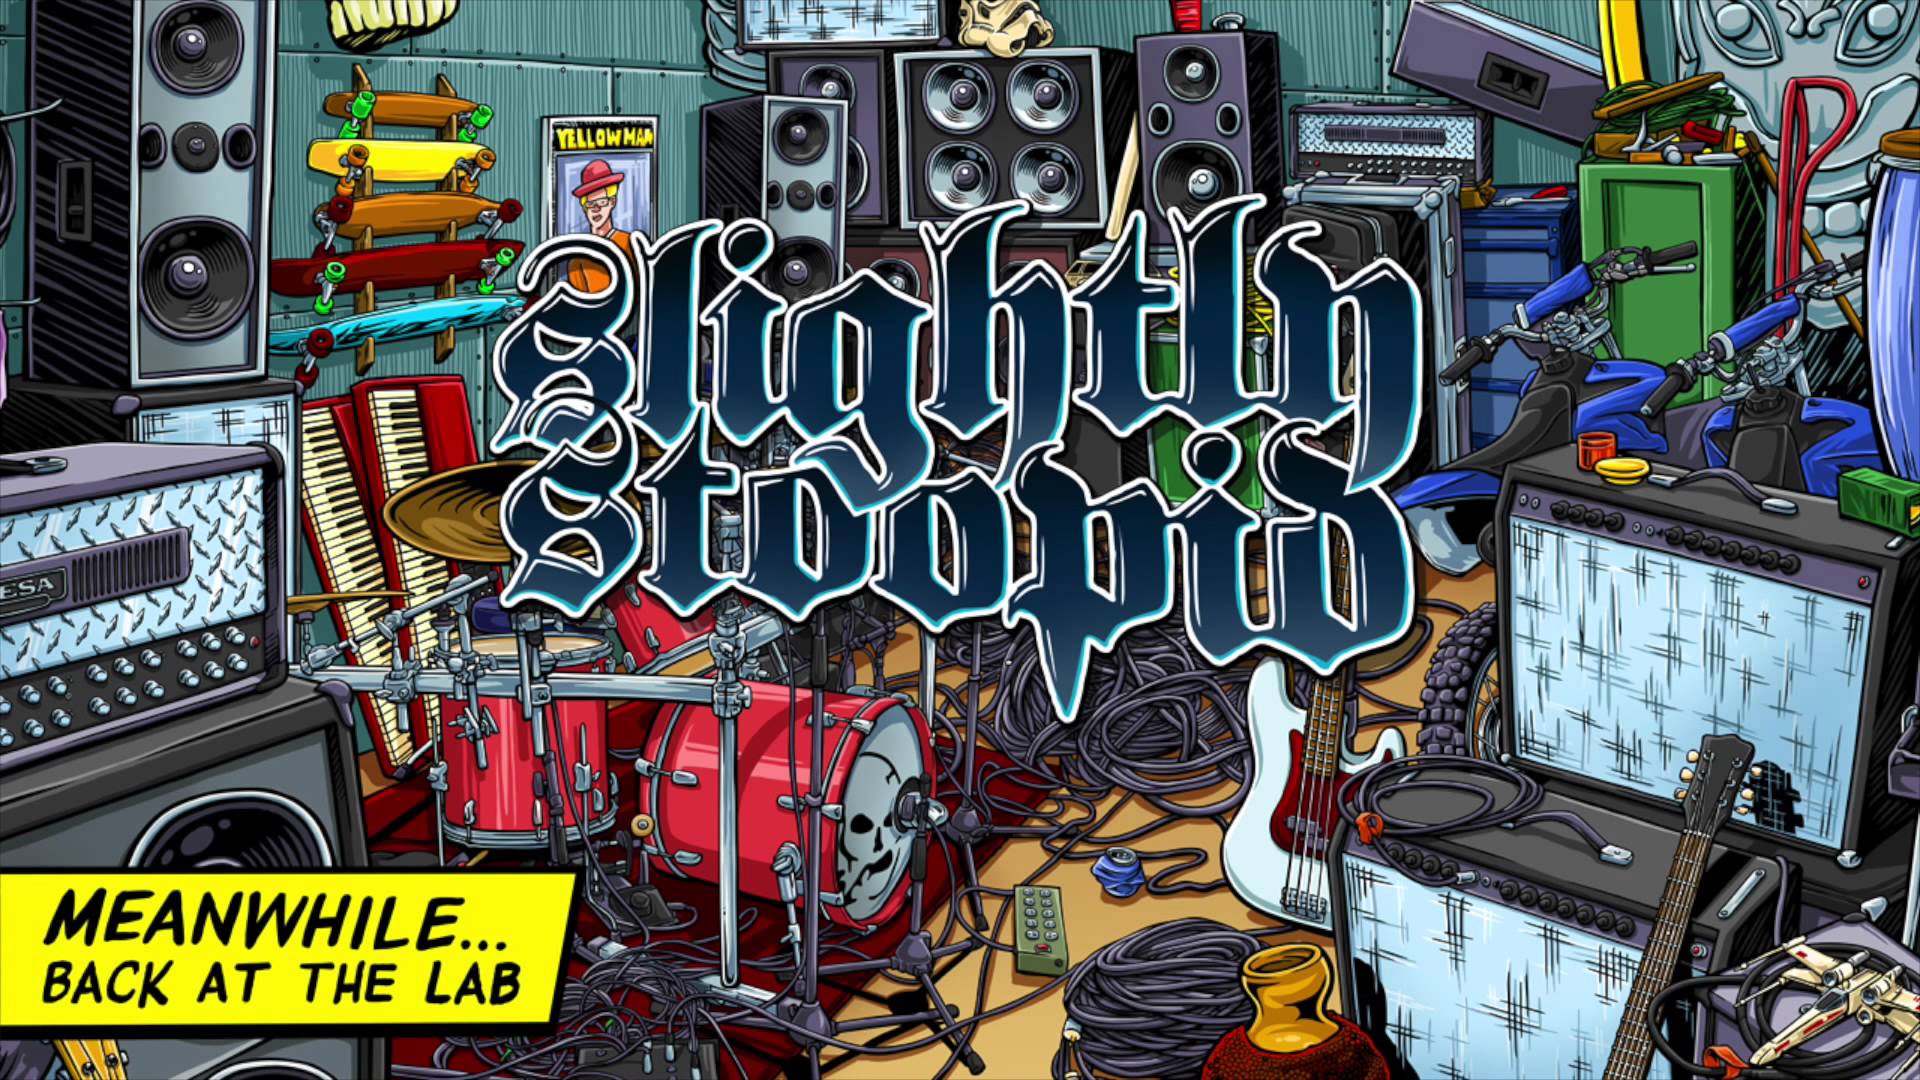 Slightly Stoopid | Meanwhile...Back at the Lab | Review